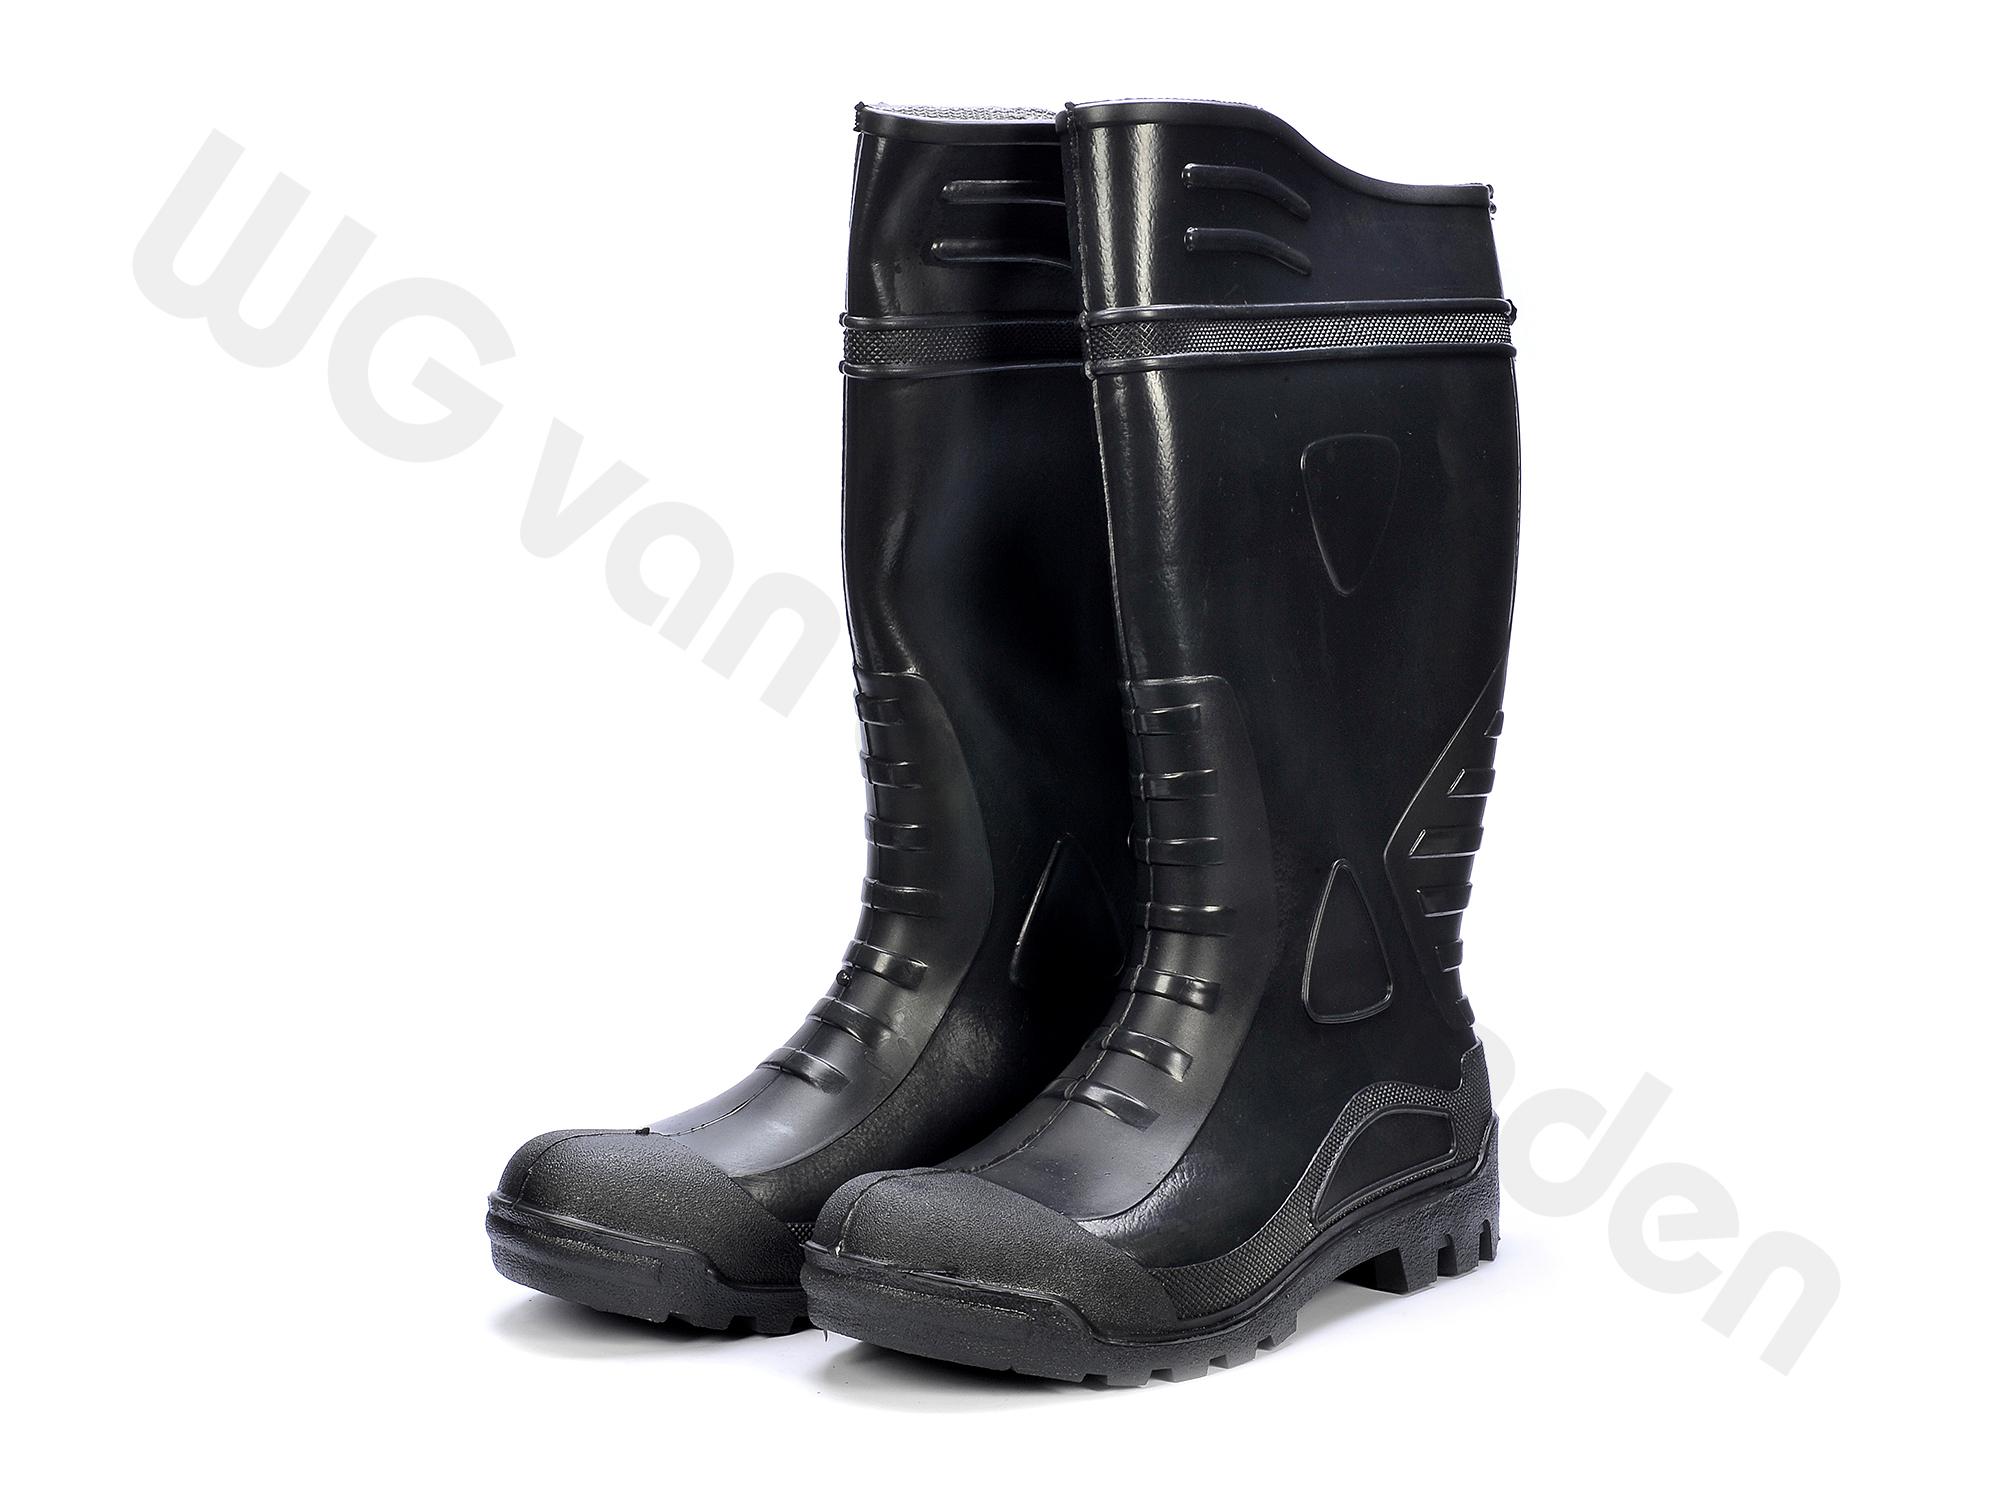 880202 BOOTS SAFETY S4 PVC WITH STEEL TOE SIZE 39/25.5CM CE